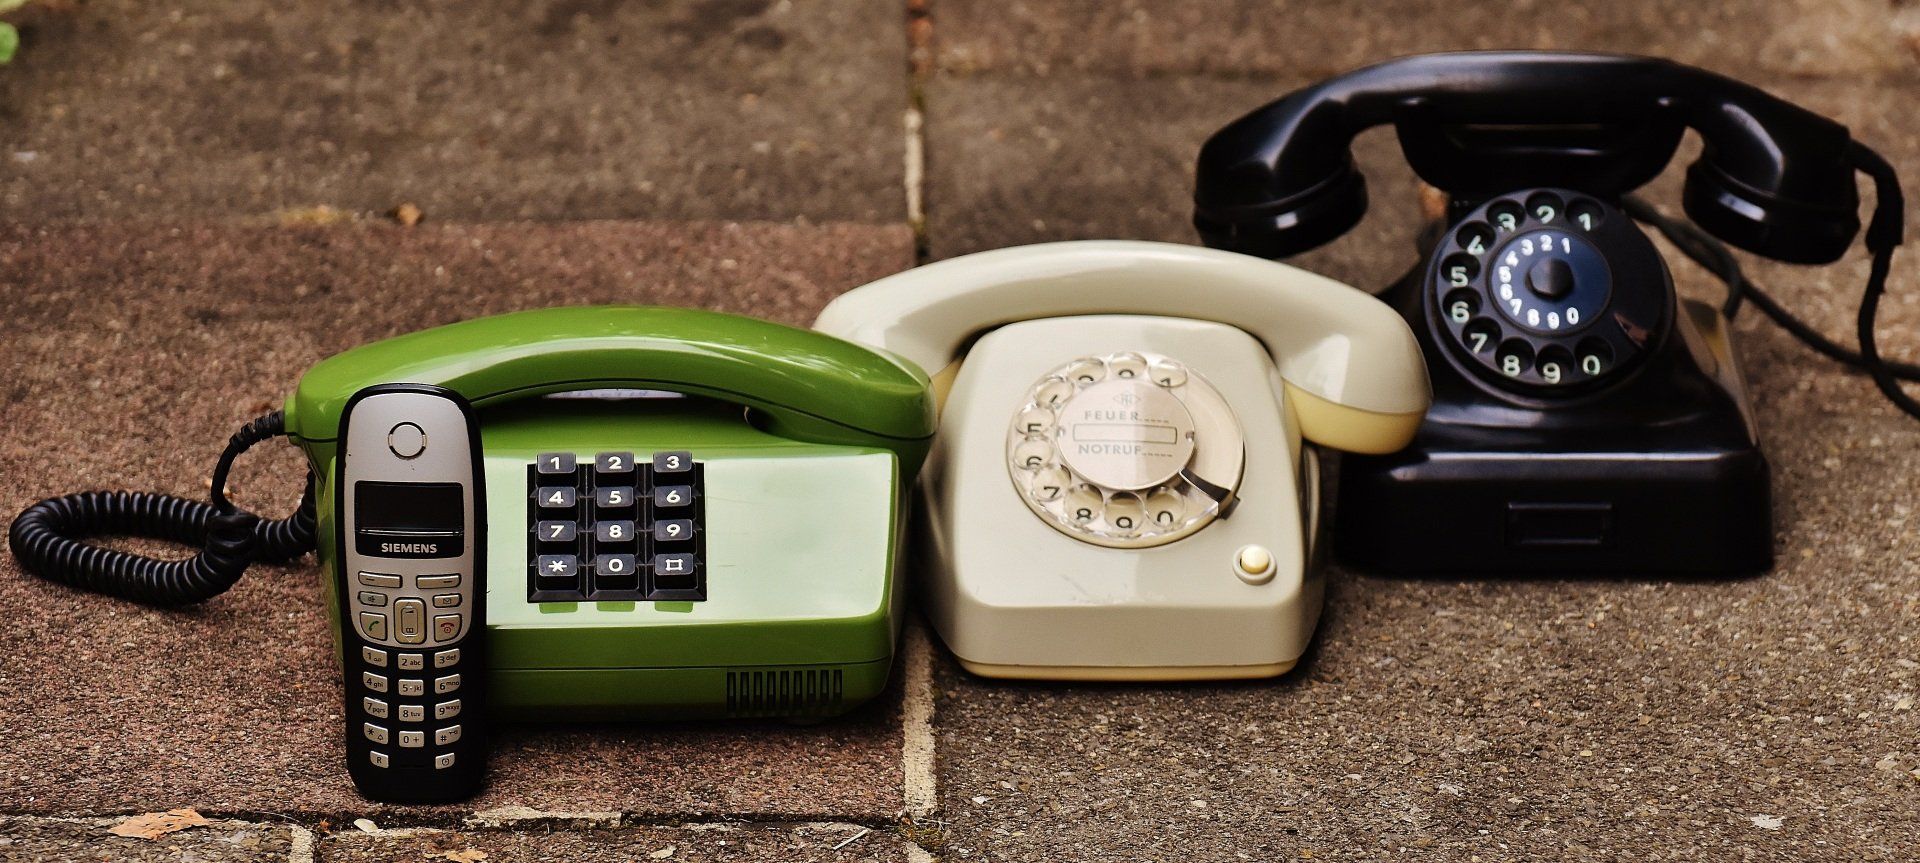 Four old-fashioned telephones with handsets and receivers